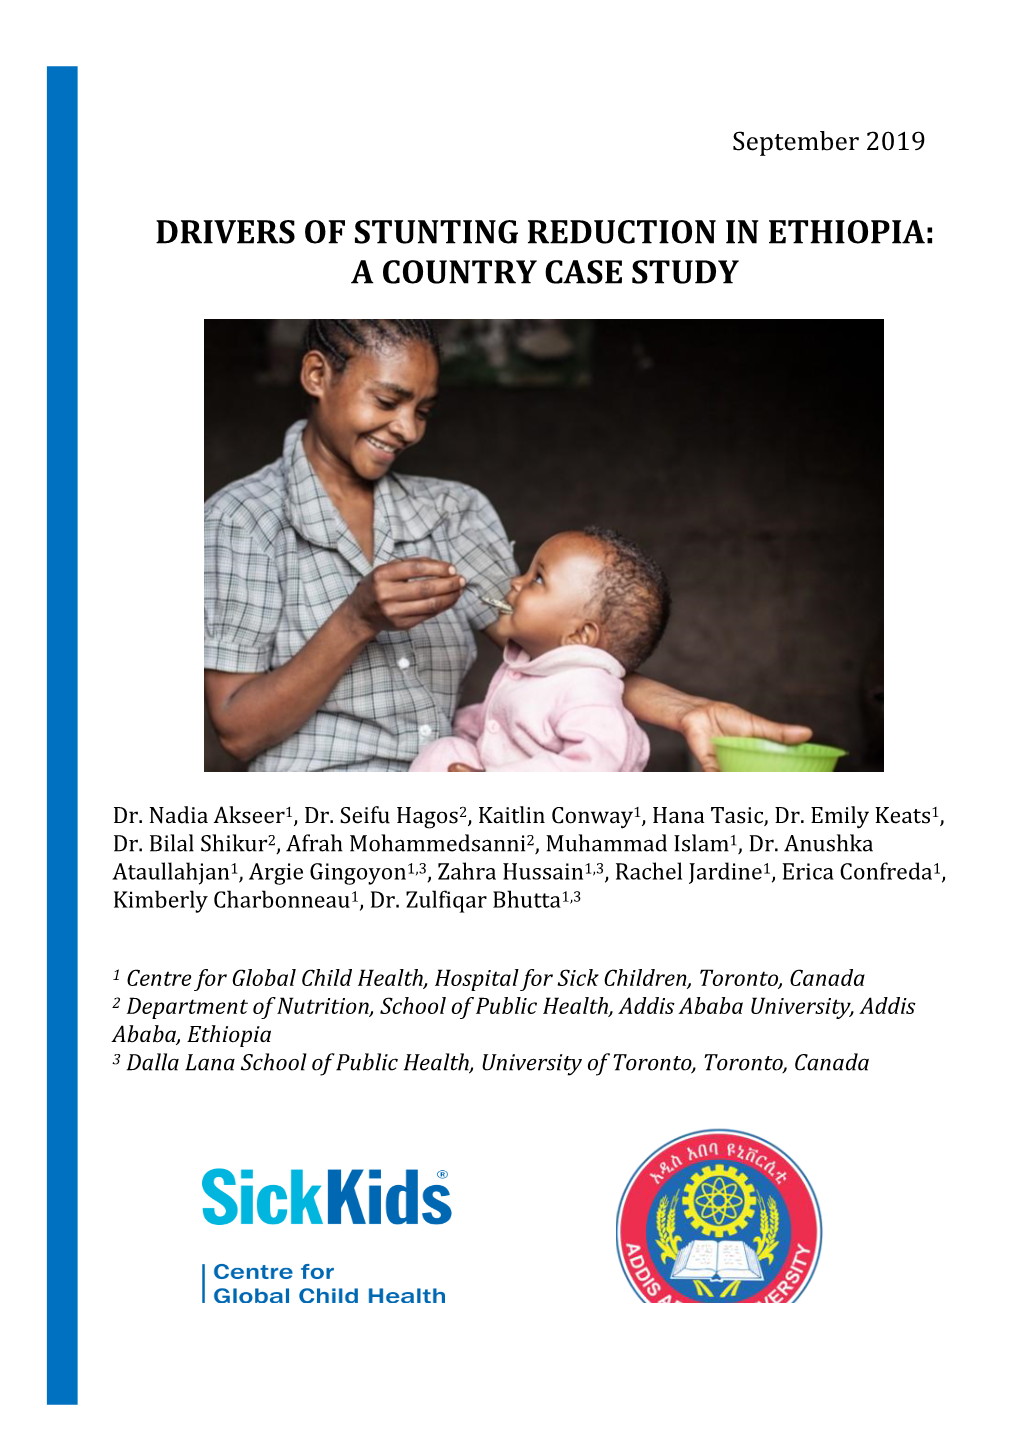 Drivers of Stunting Reduction in Ethiopia: a Country Case Study